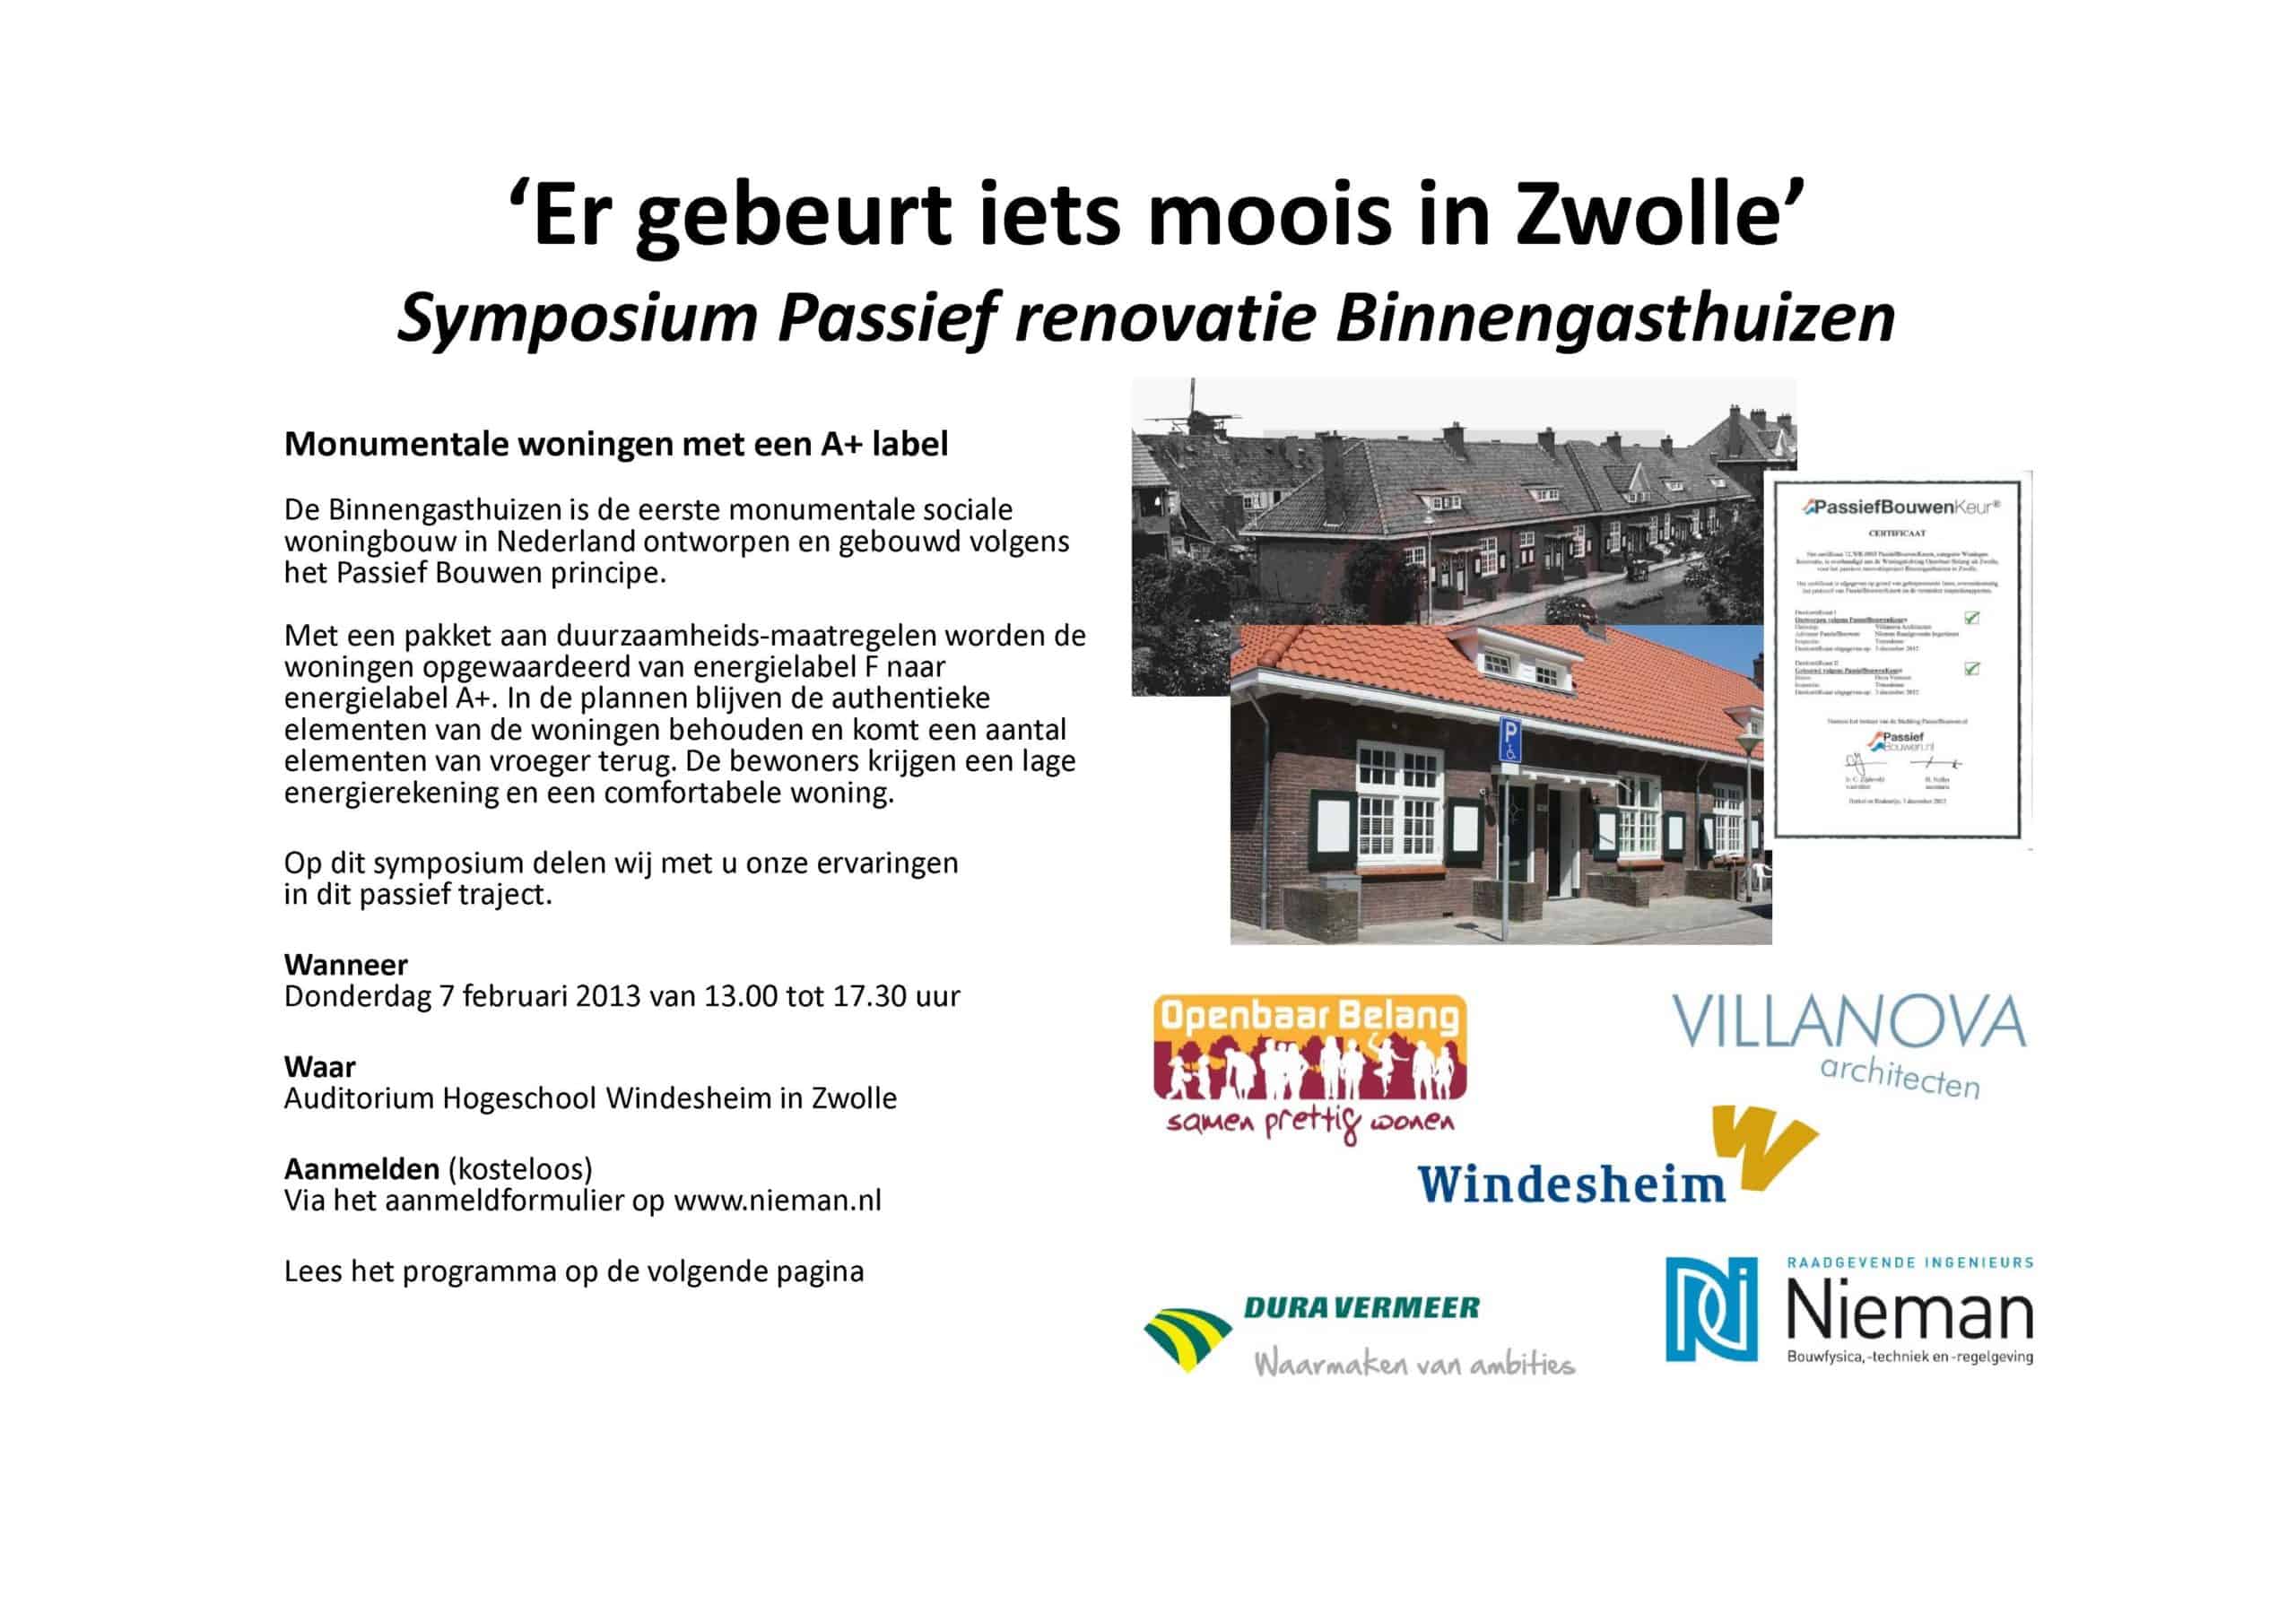 Flyer-Symposium-Er-gebeurt-iets-moois-in-Zwolle_1-3-scaled